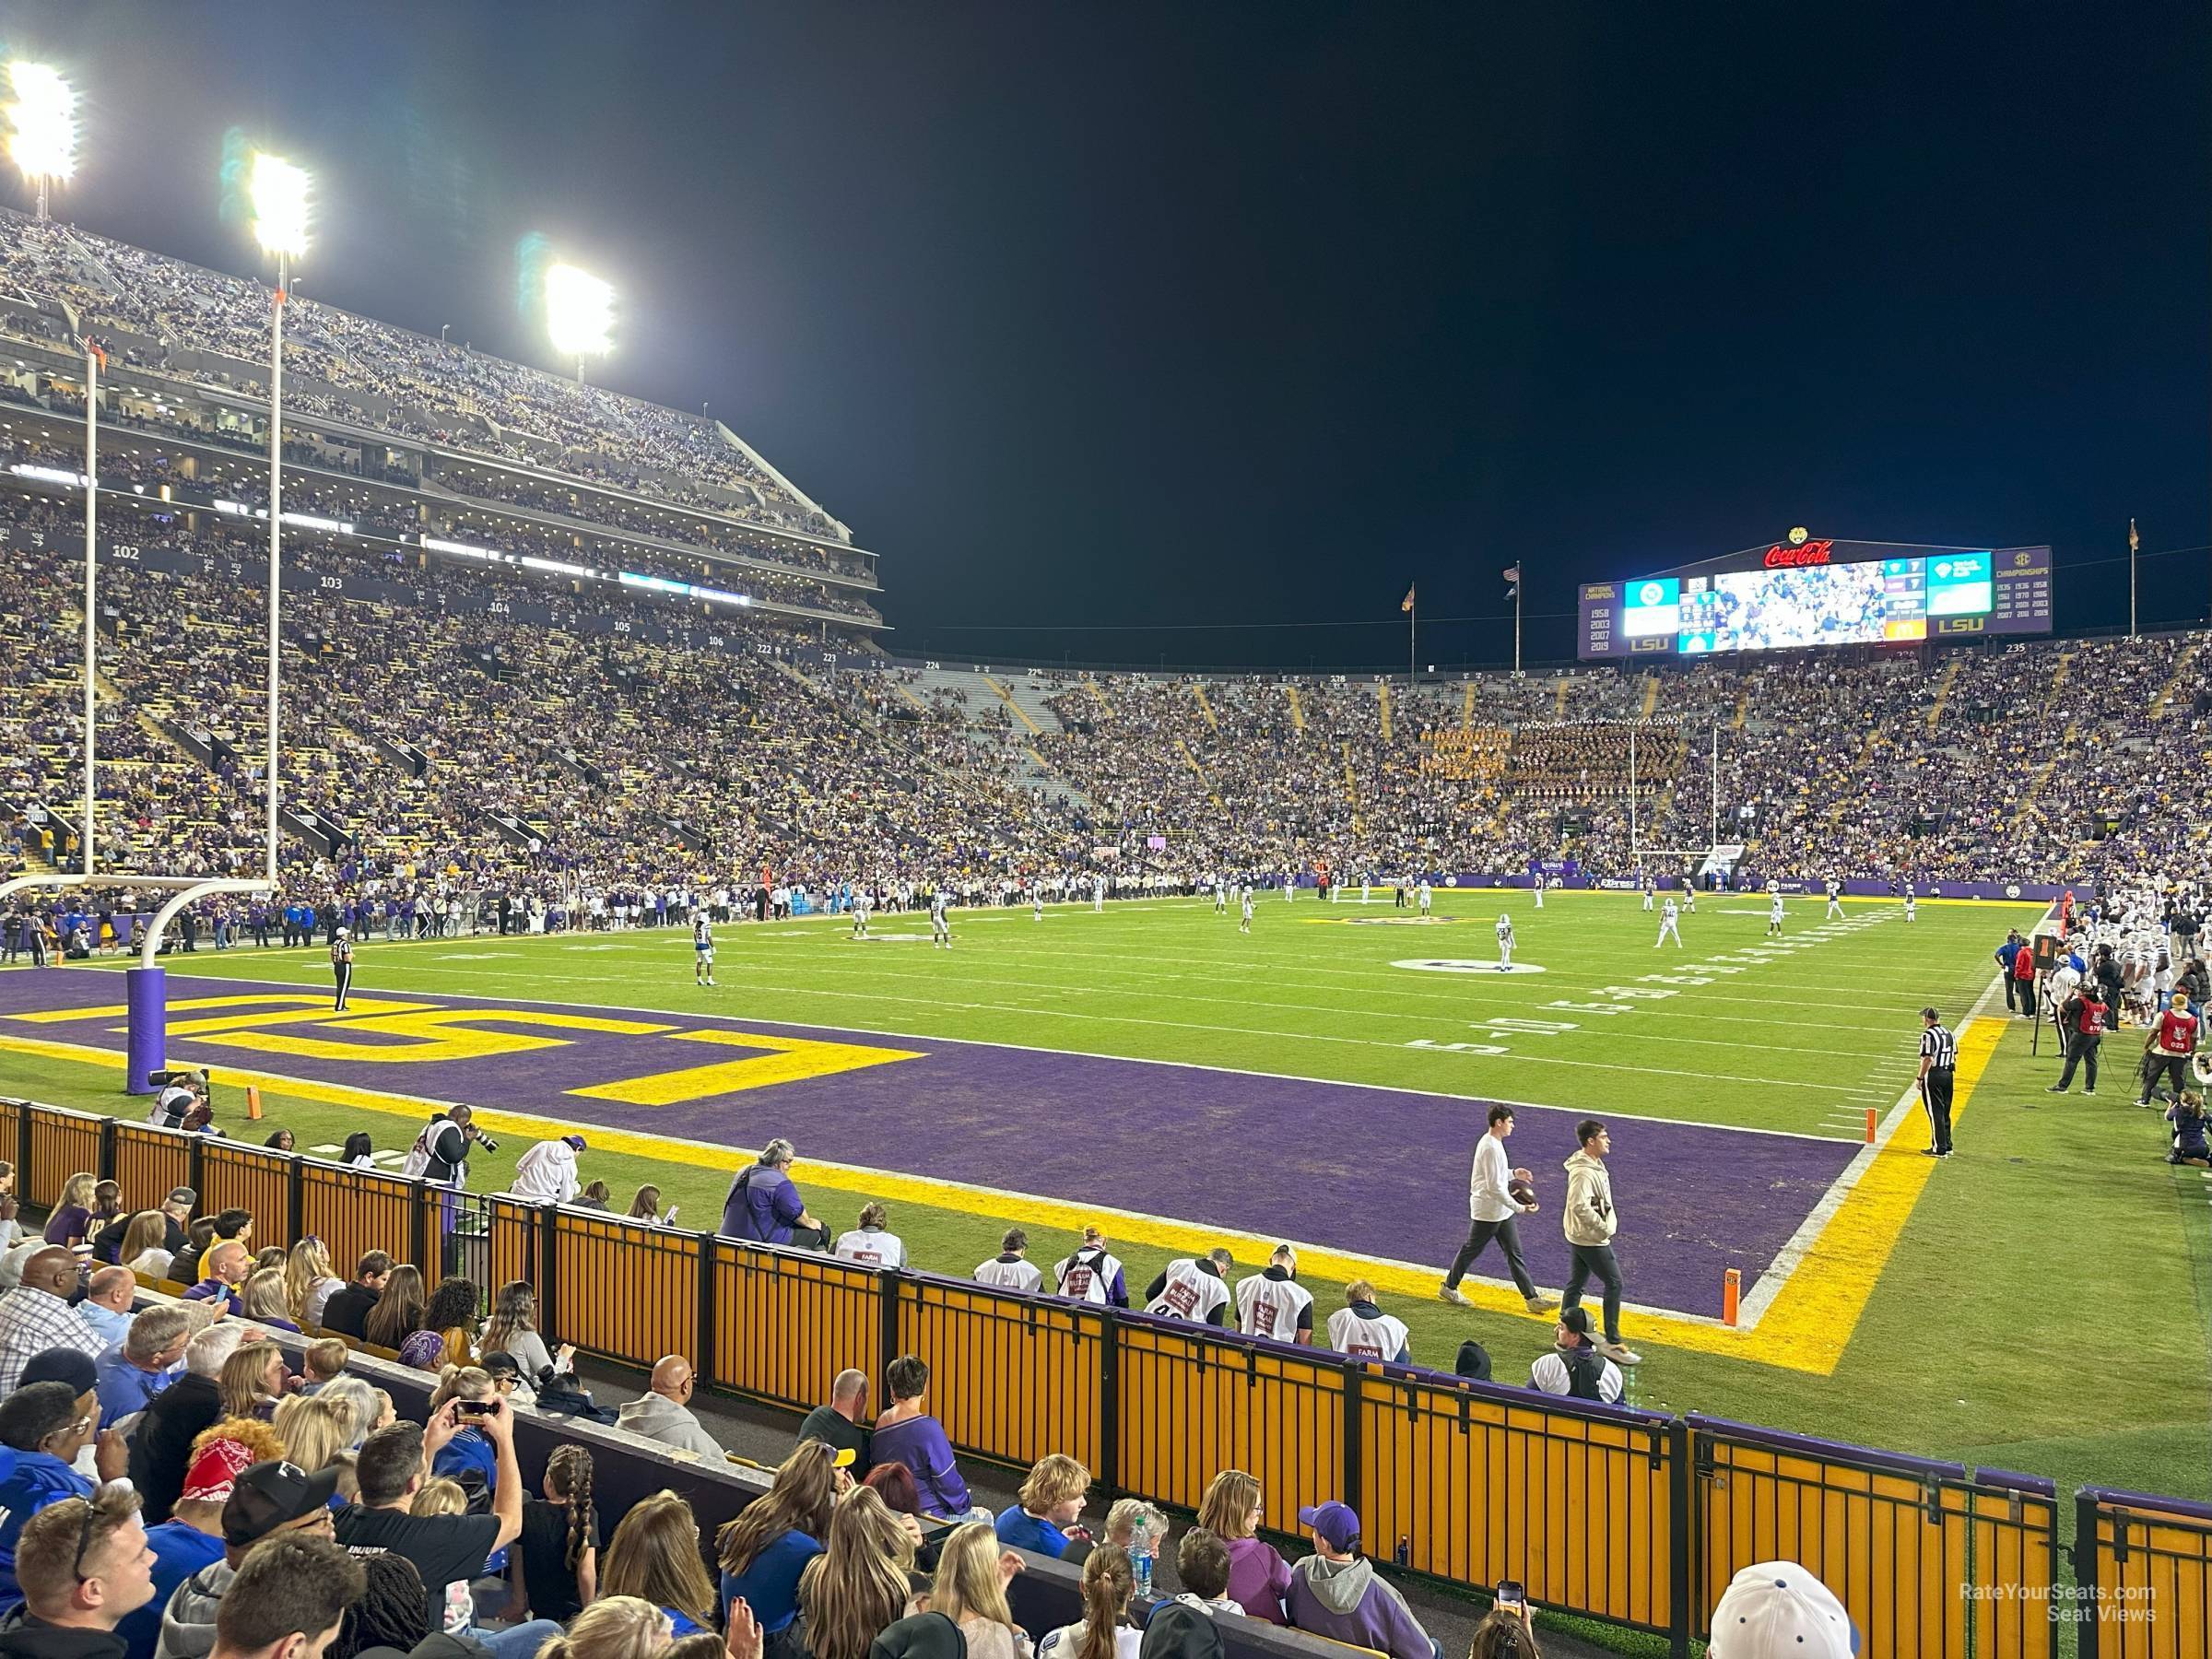 section 404, row 6 seat view  - tiger stadium